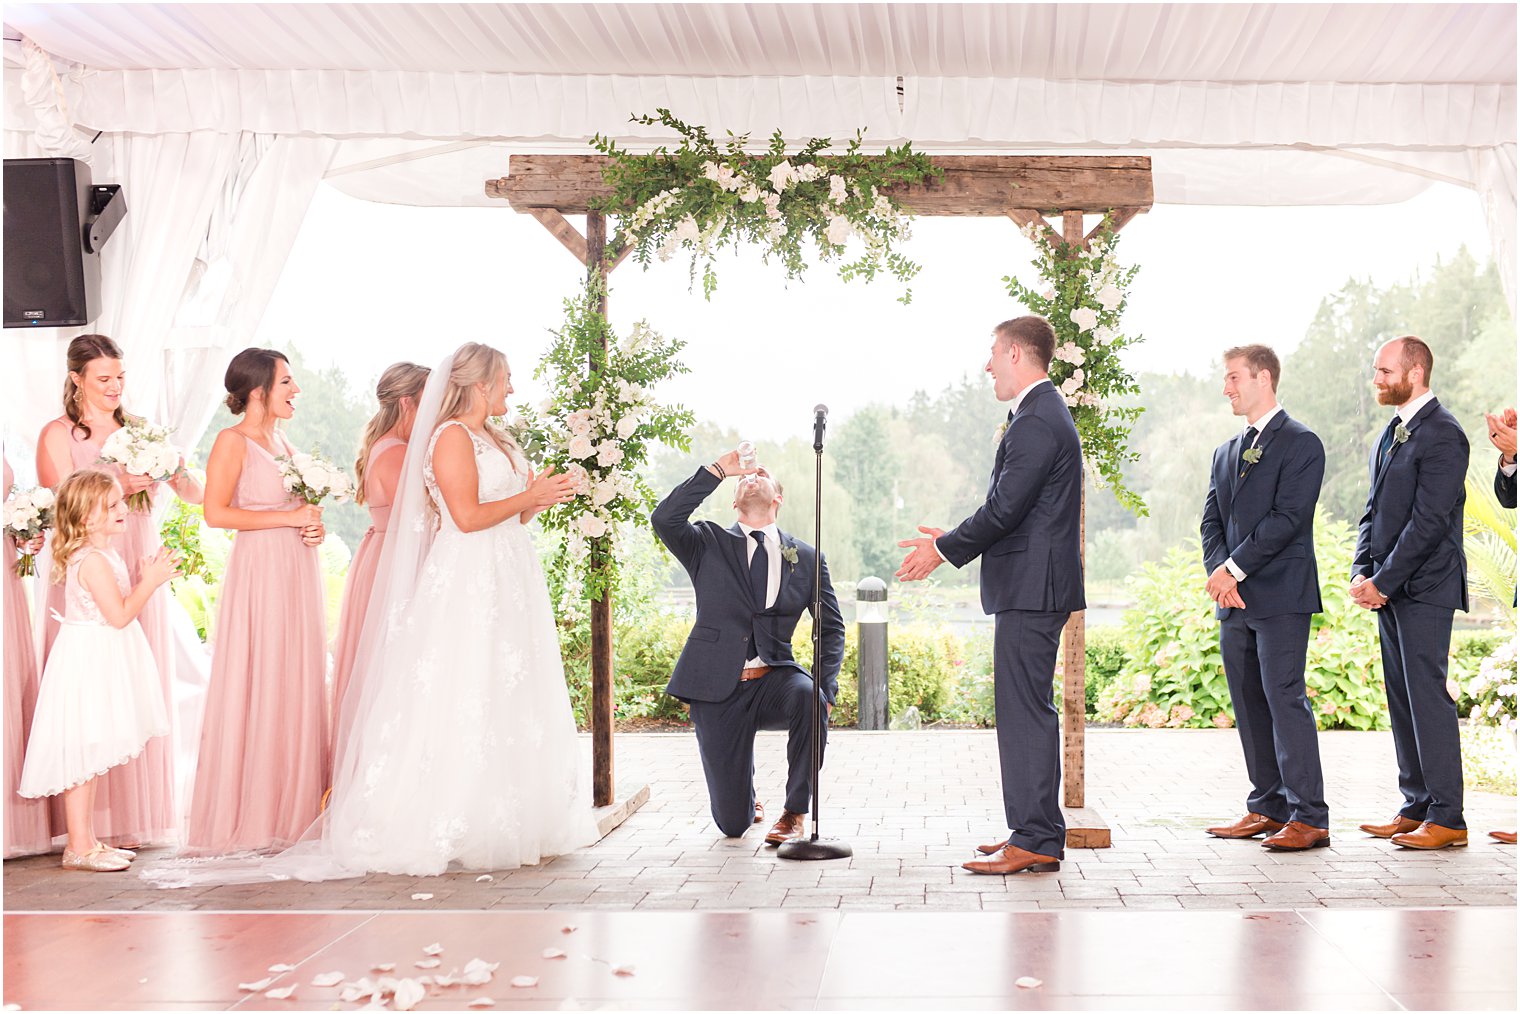 officiant drinks on one knee before ceremony 